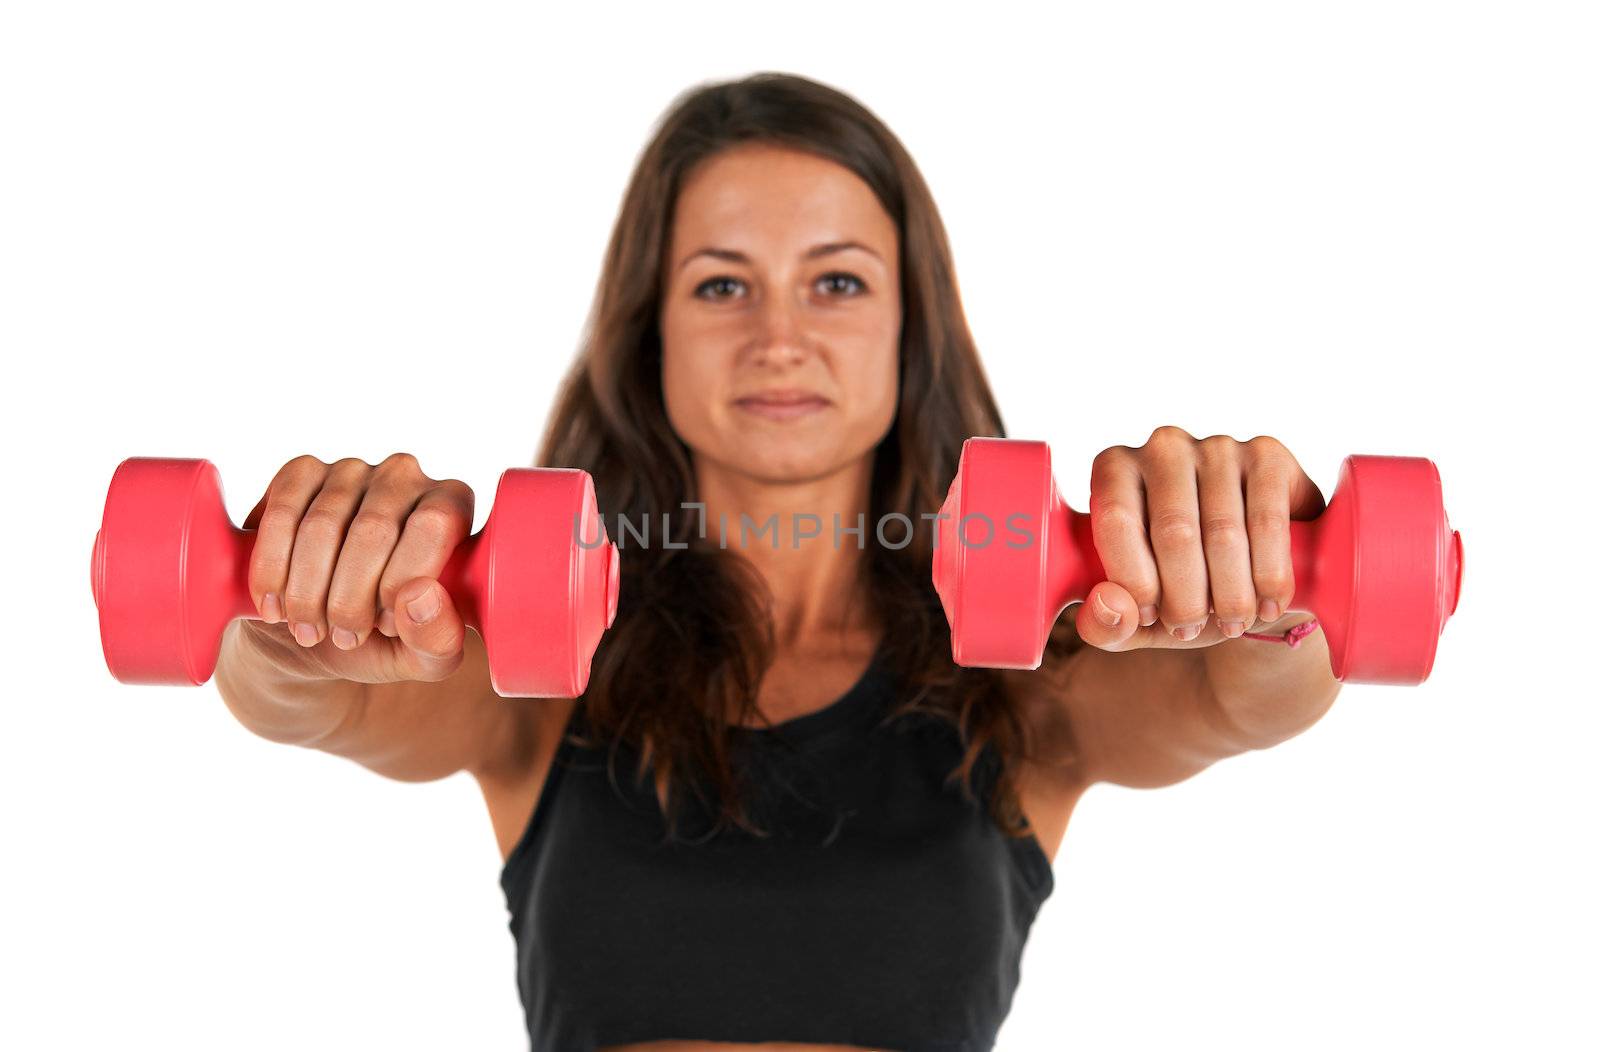 Weights in the hands of a young woman in the studio